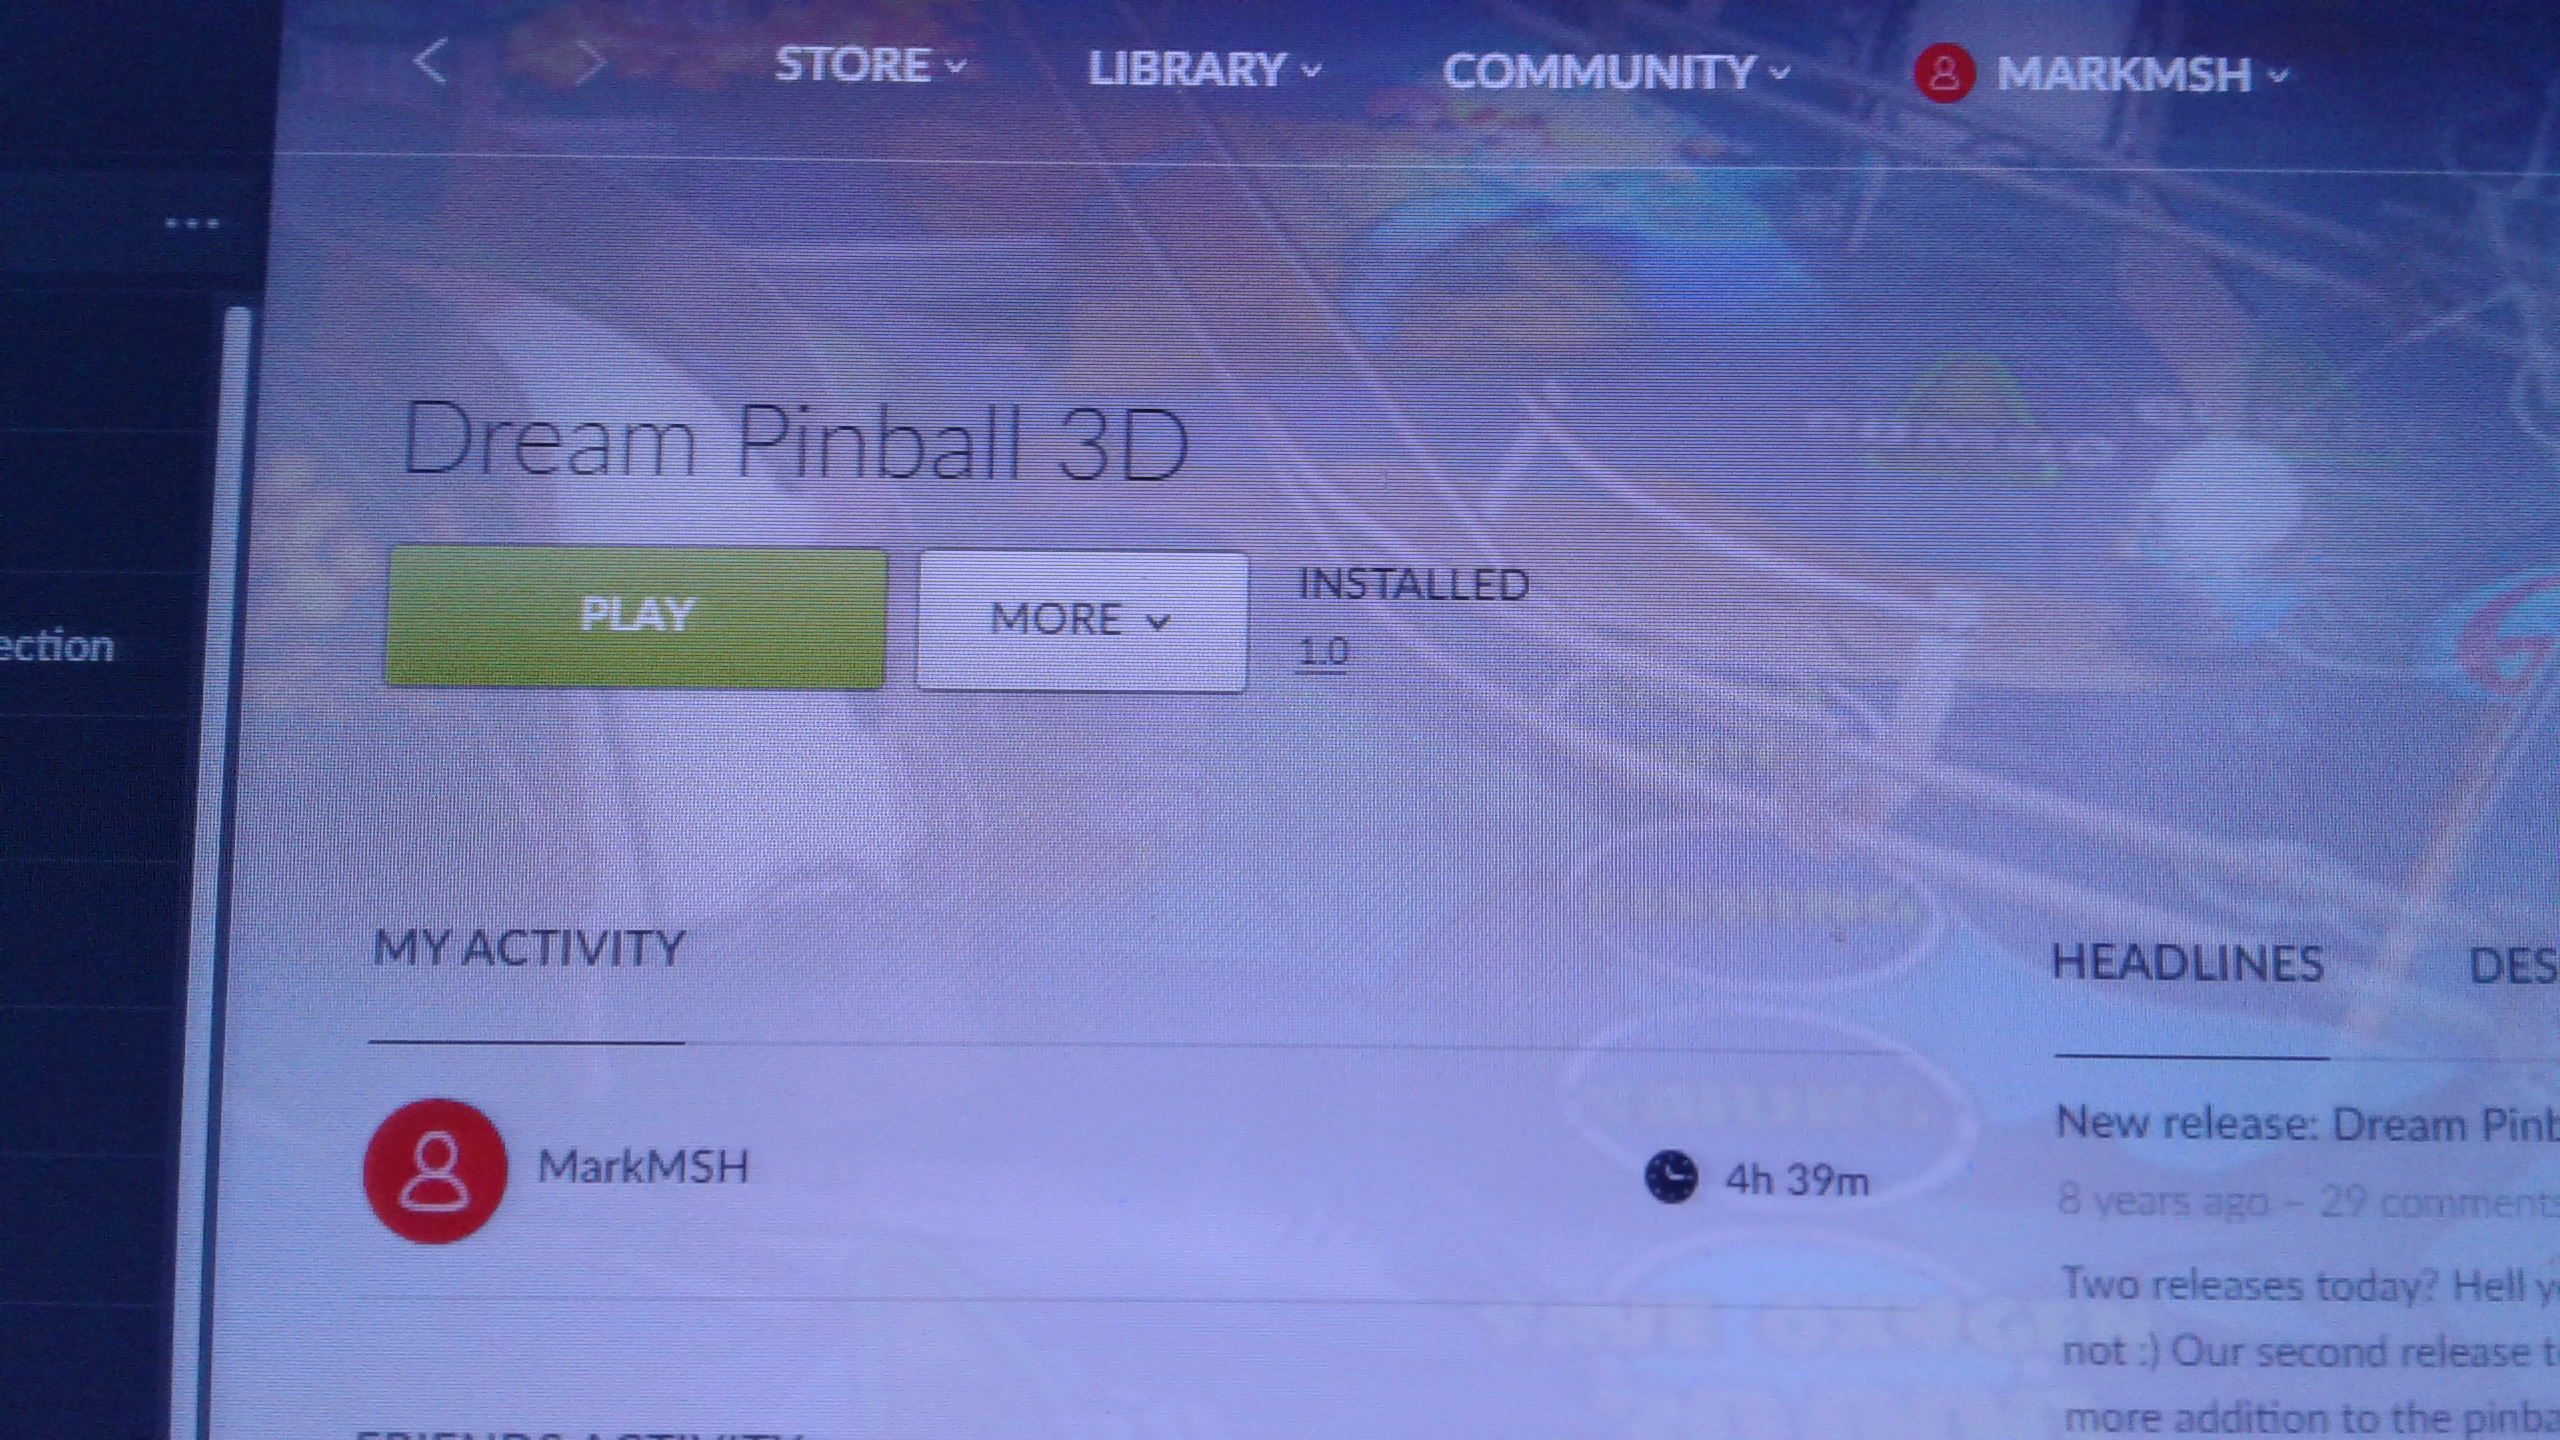 Mark: Dream Pinball 3D: Amber Moon [Normal] (PC Emulated / DOSBox) 444,718,680 points on 2019-05-17 00:02:39